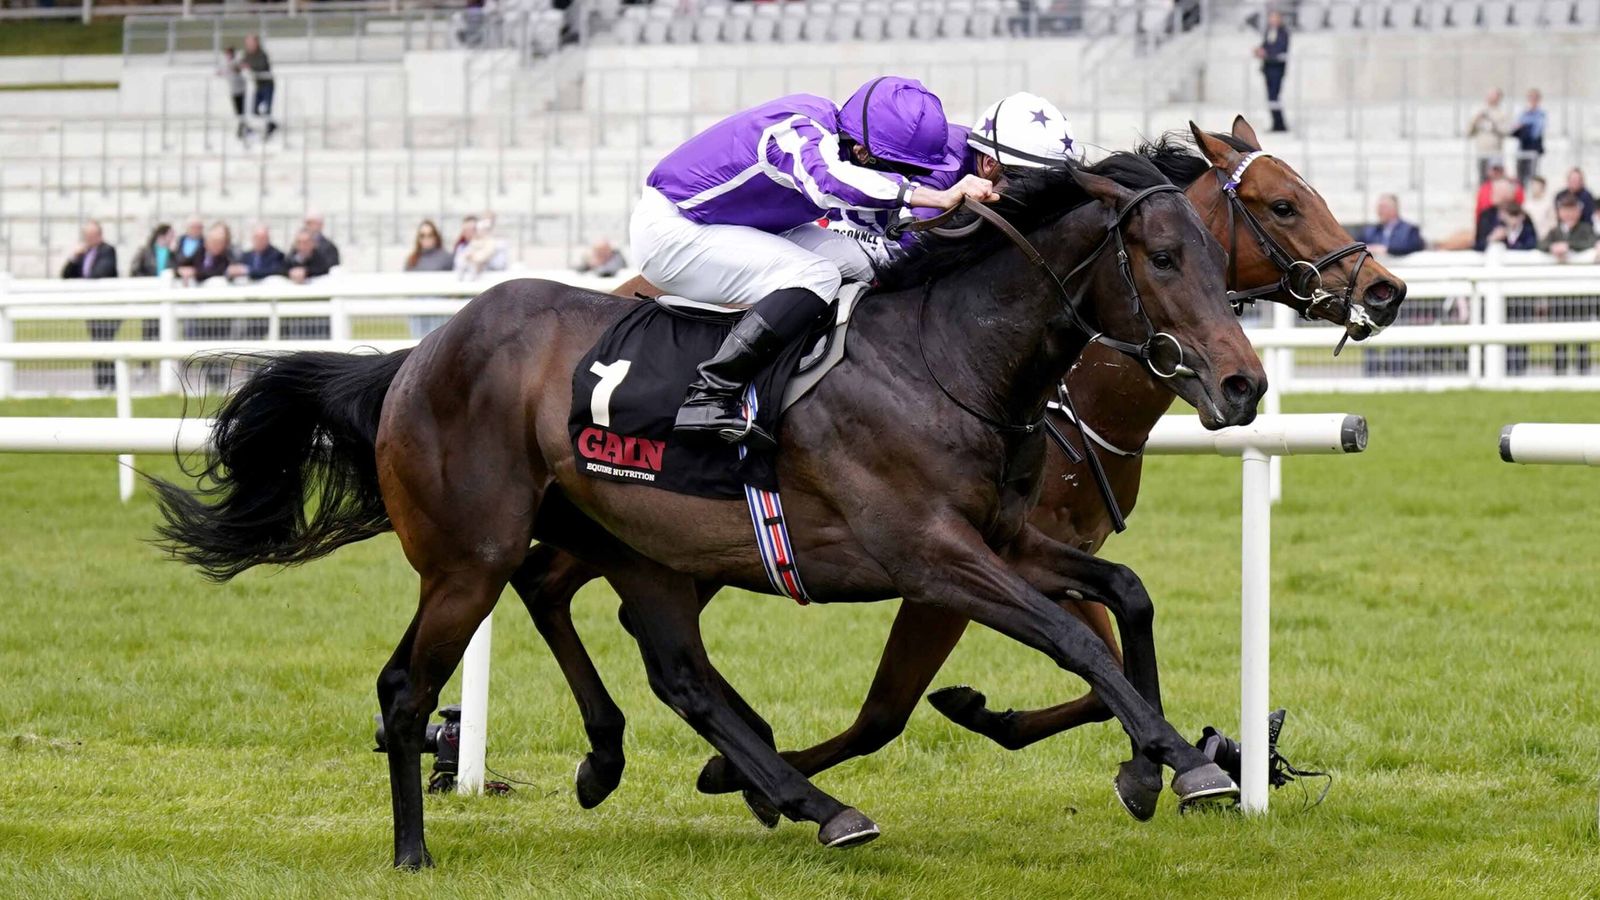 Dominant performance from Blackbeard at Chantilly